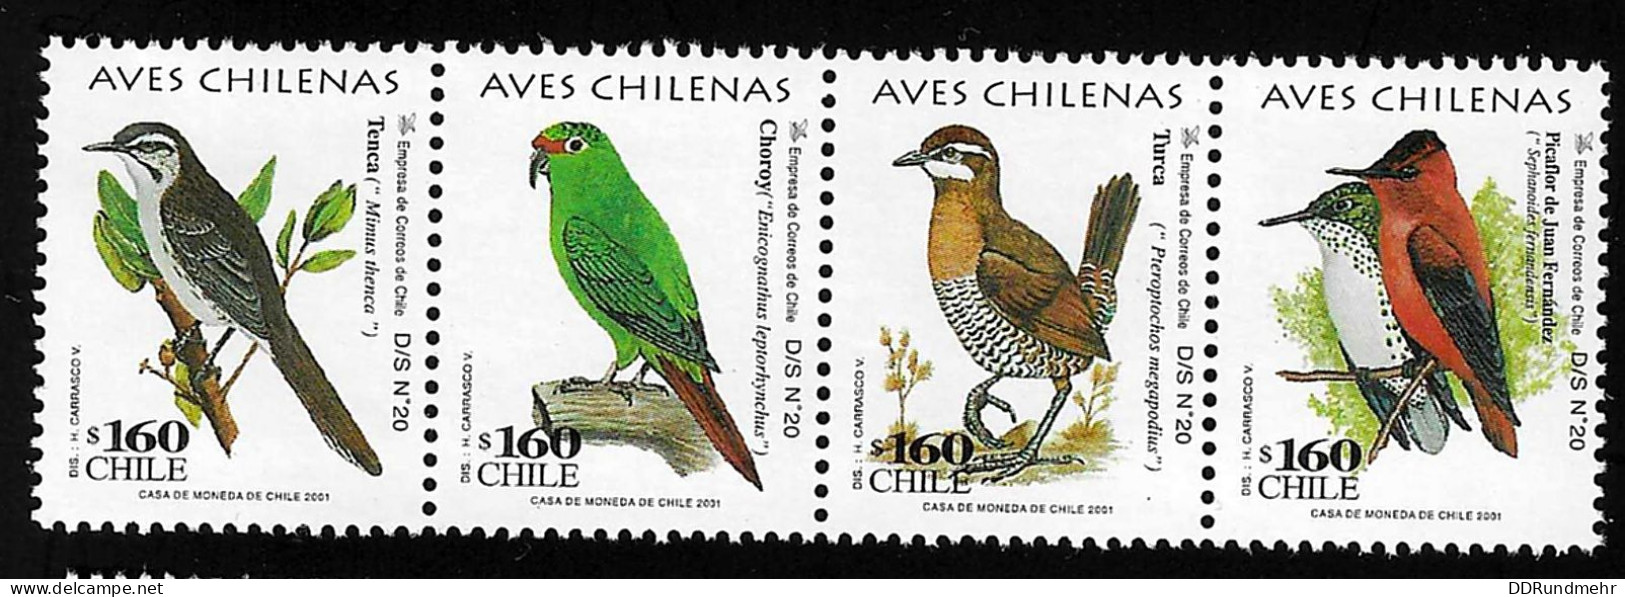 2001 Birds Michel CL 2003 - 2006 Stamp Number CL 1356a - 1356d Yvert Et Tellier CL 1580 - 1583 Xx MNH - Chili